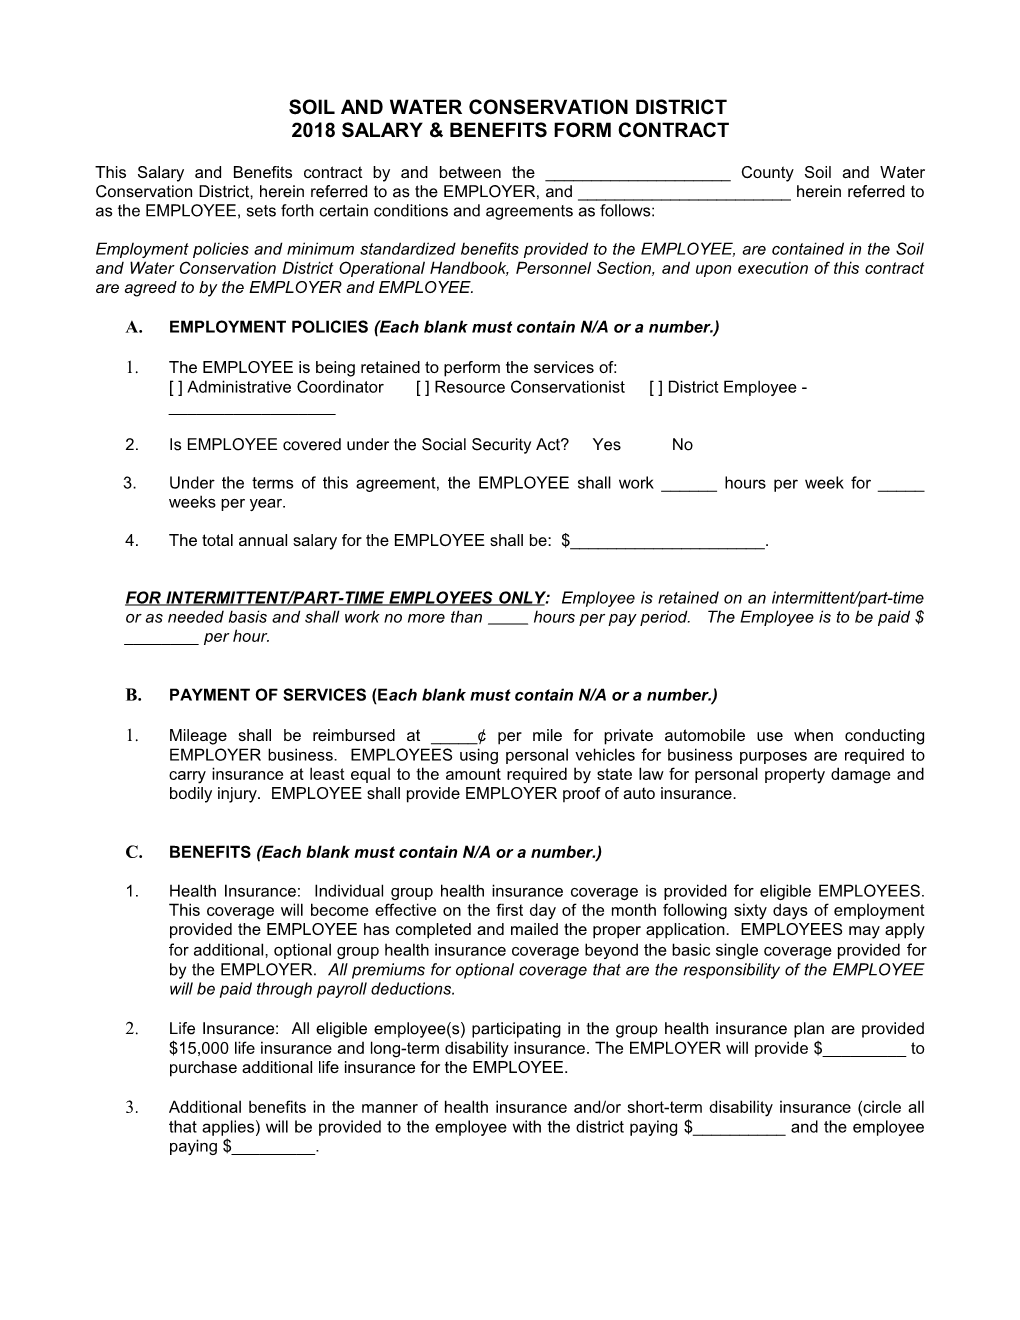 Soil and Water Conservation District Employment Contract